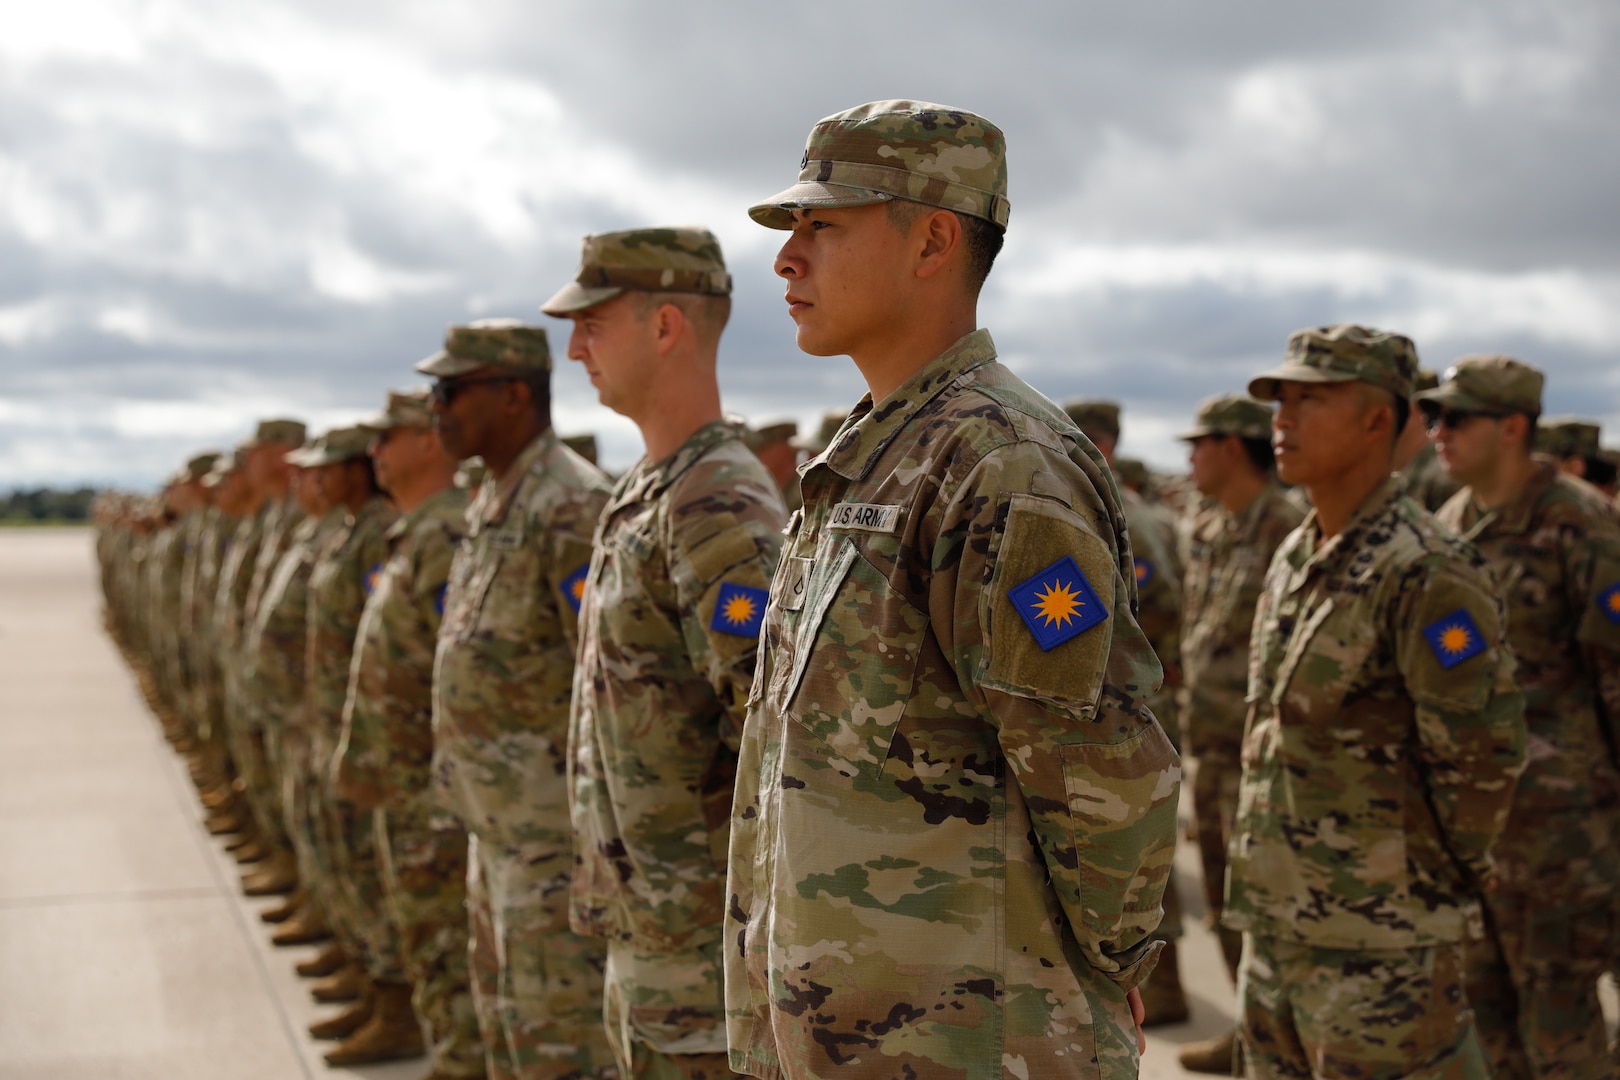 U.S. Army Soldiers stand in formation during the 40th Infantry Division deployment ceremony at Joint Forces Training Base Los Alamitos, Calif., June 11, 2023. The 40th Infantry Division will take part in peacekeeping Operation Spartan Shield in southwest Asia.